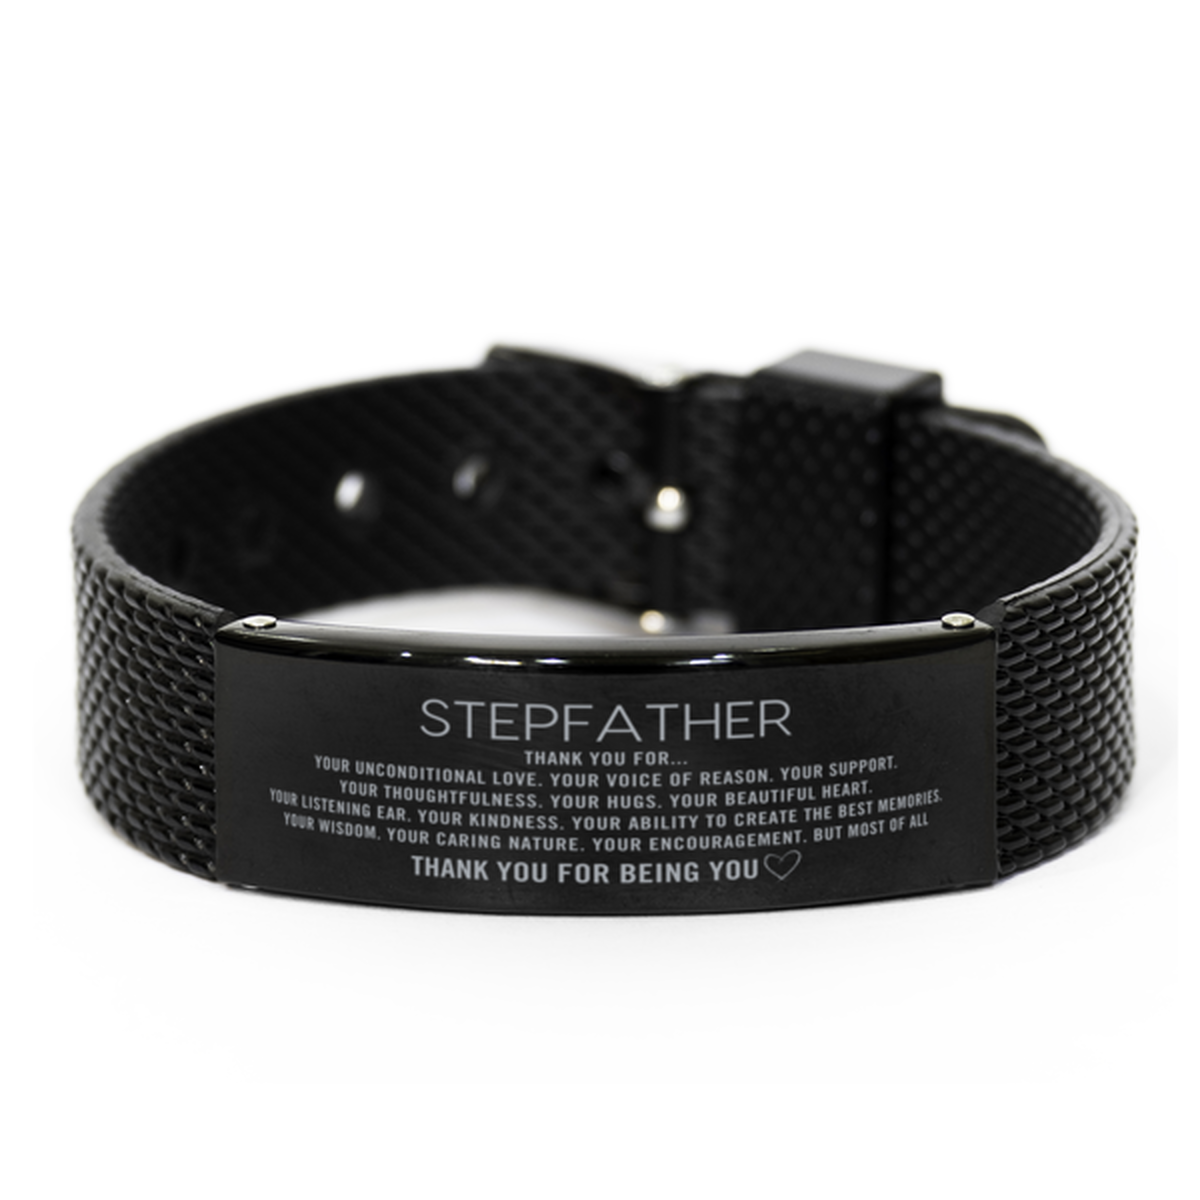 Stepfather Black Shark Mesh Bracelet Custom, Engraved Gifts For Stepfather Christmas Graduation Birthday Gifts for Men Women Stepfather Thank you for Your unconditional love